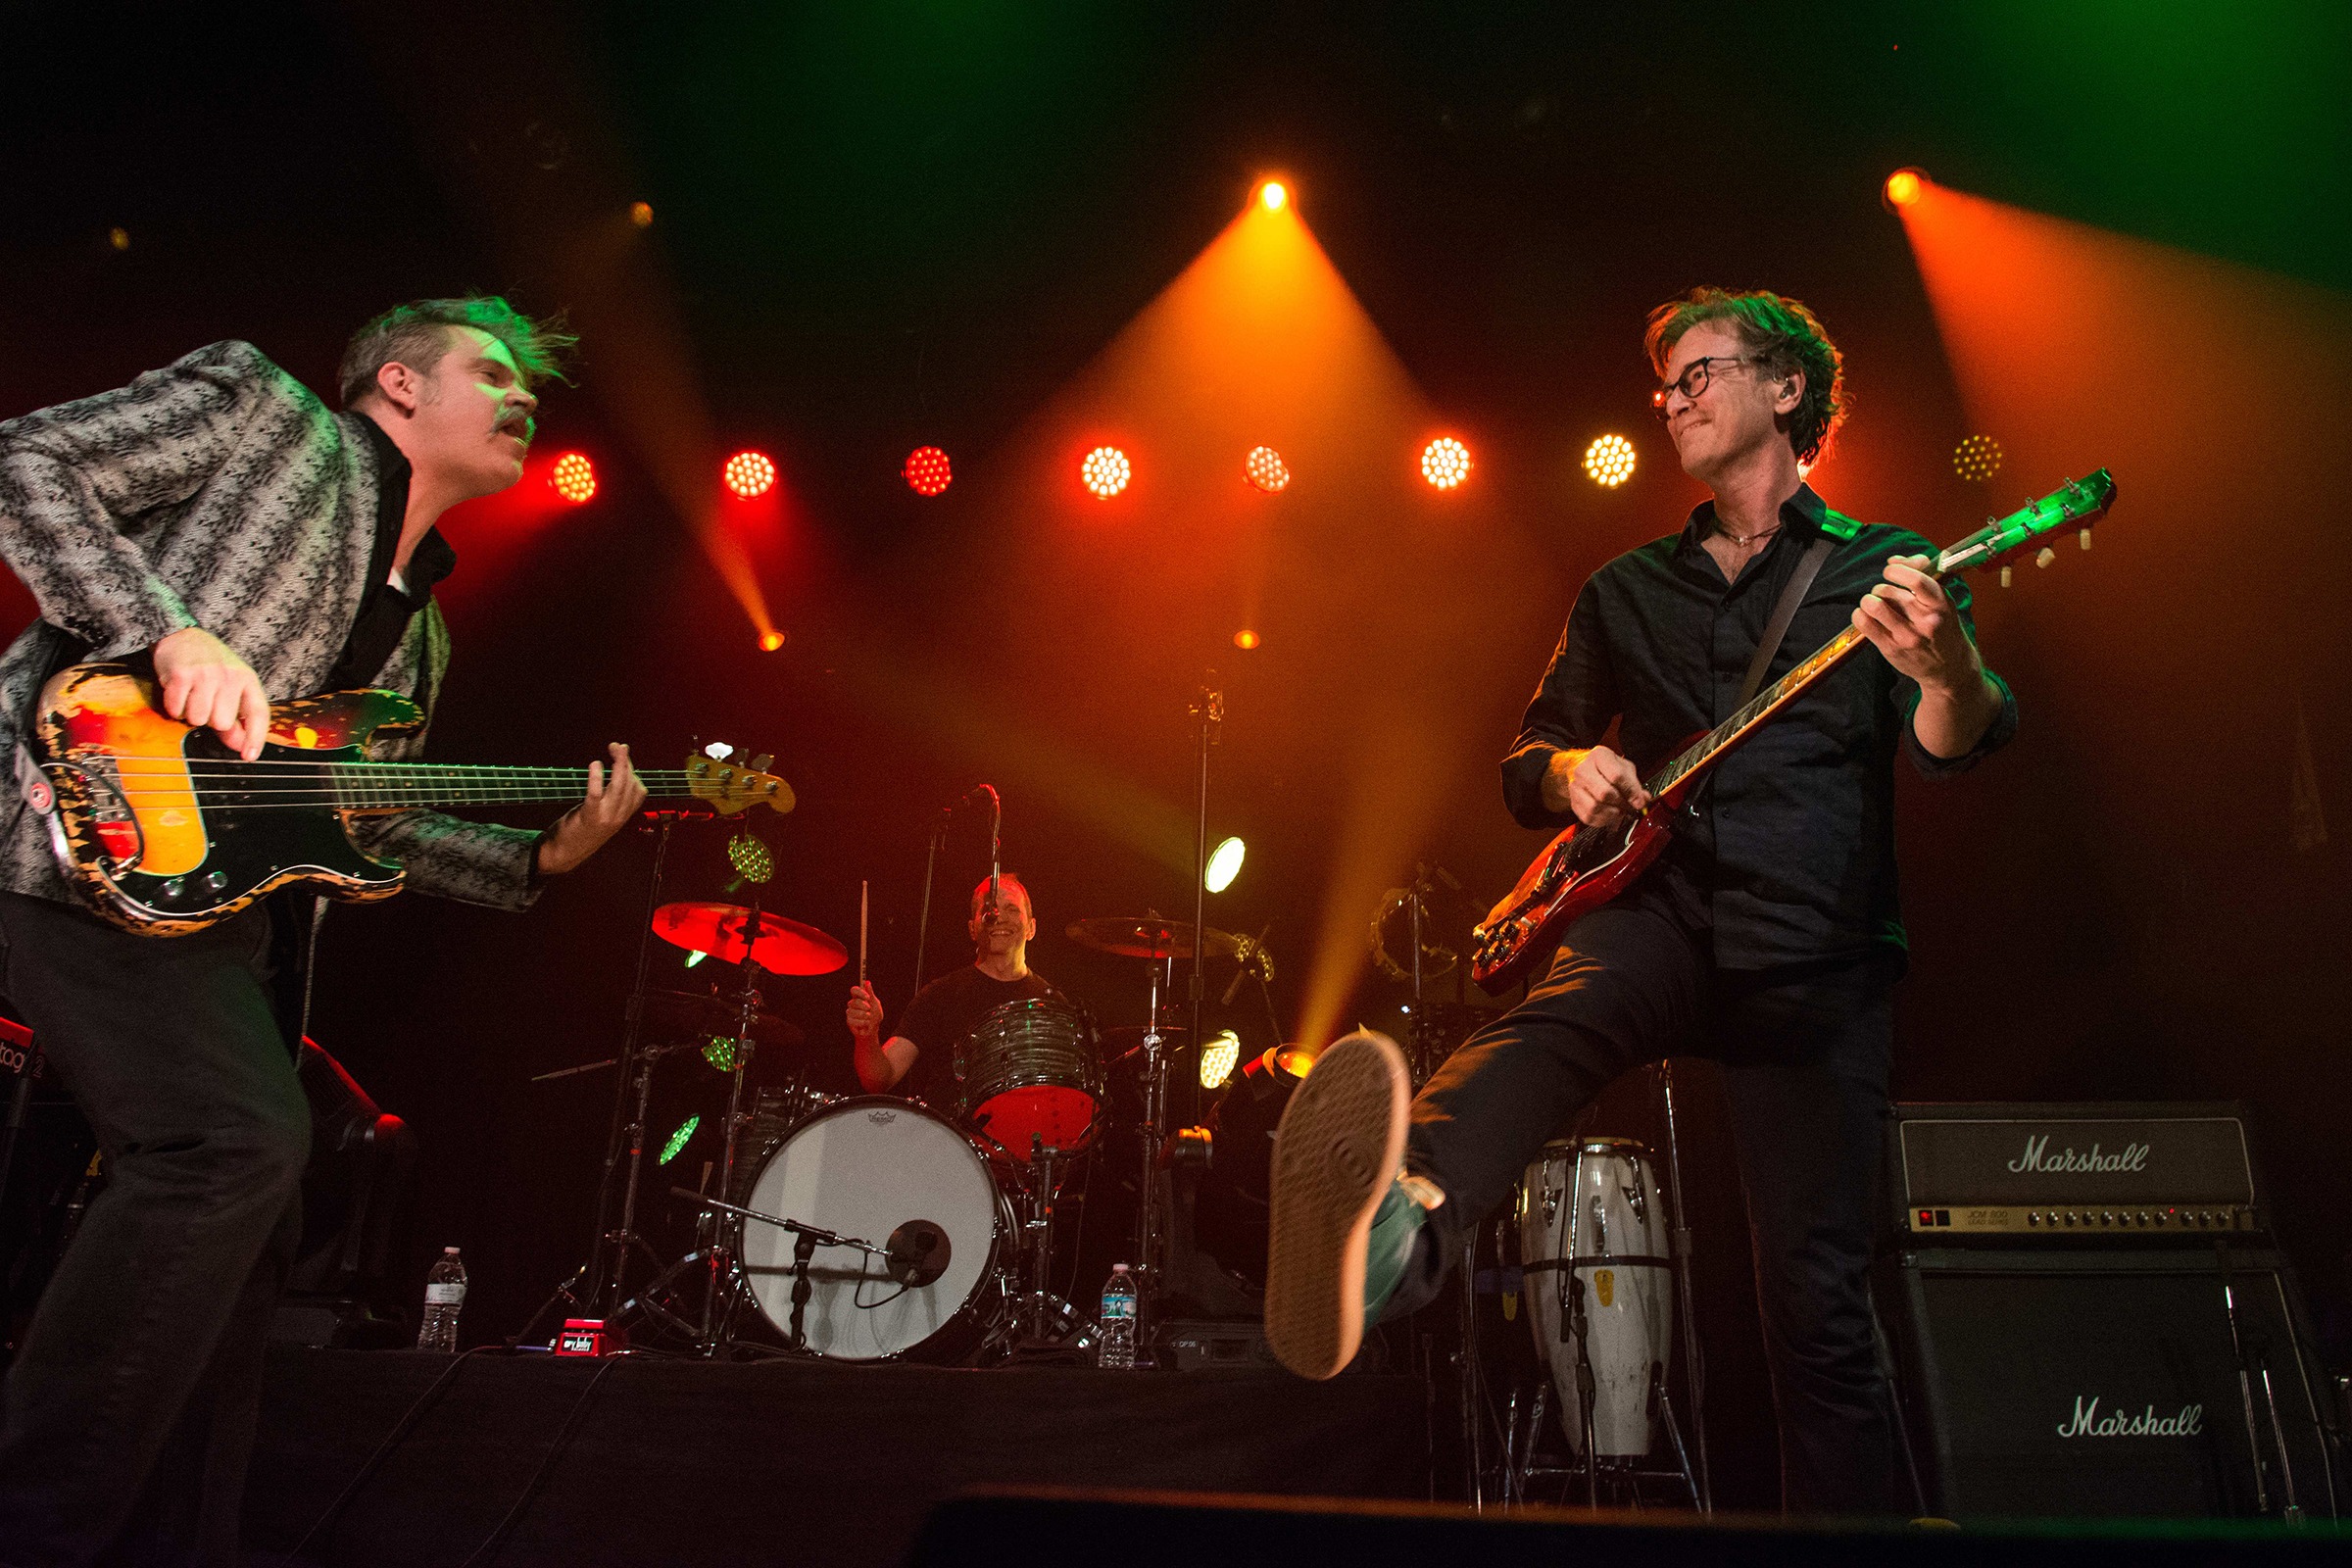 SEMISONIC release 'You’re Not Alone' their first new song in nearly 20 years - Listen Now 1